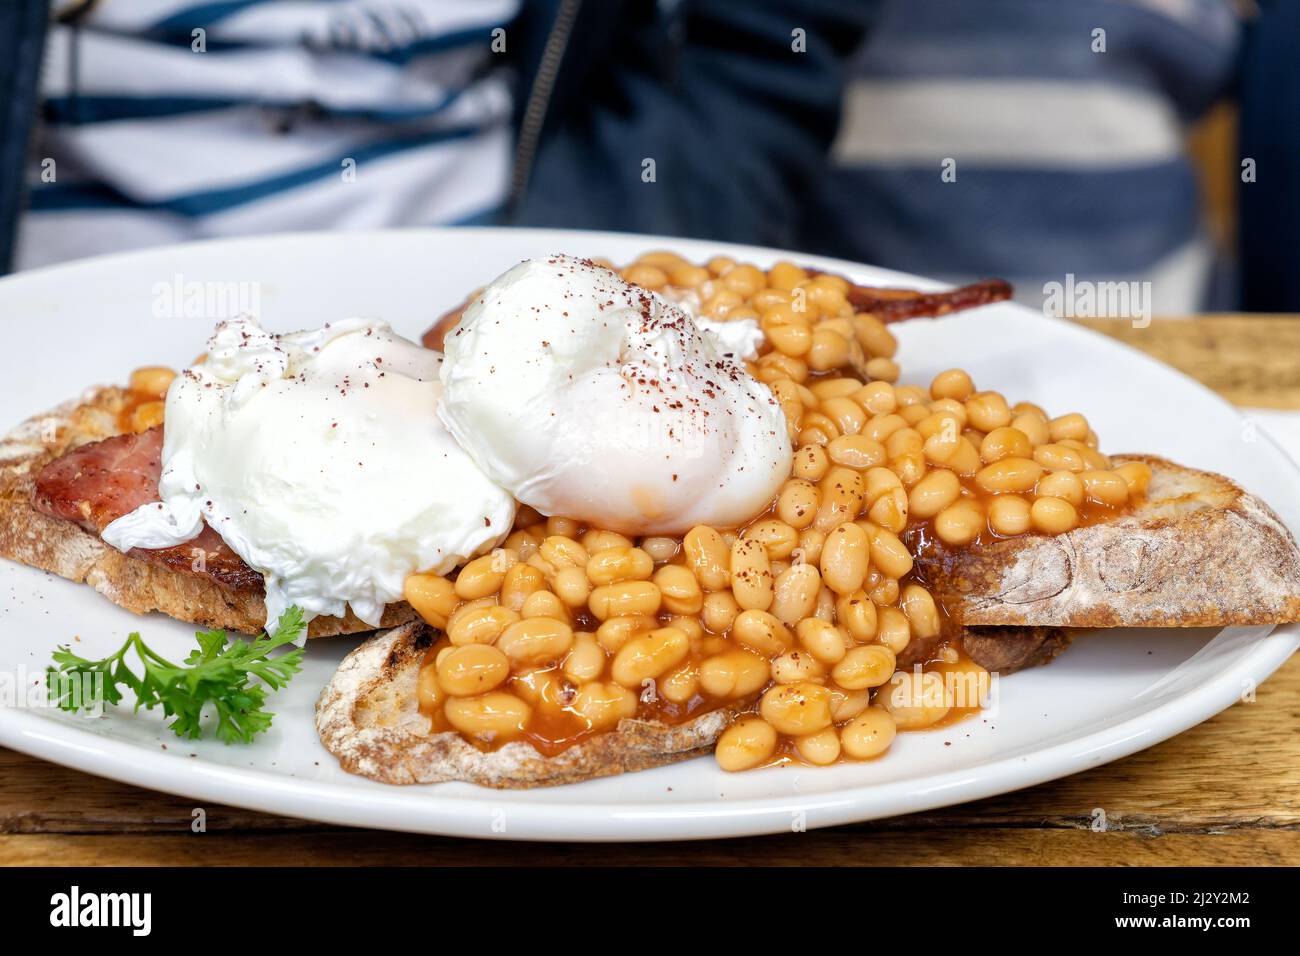 A healthier traditional english breakfast meal of beans on toast. It’s served with sour dough bread and the eggs are poached rather than fried Stock Photo